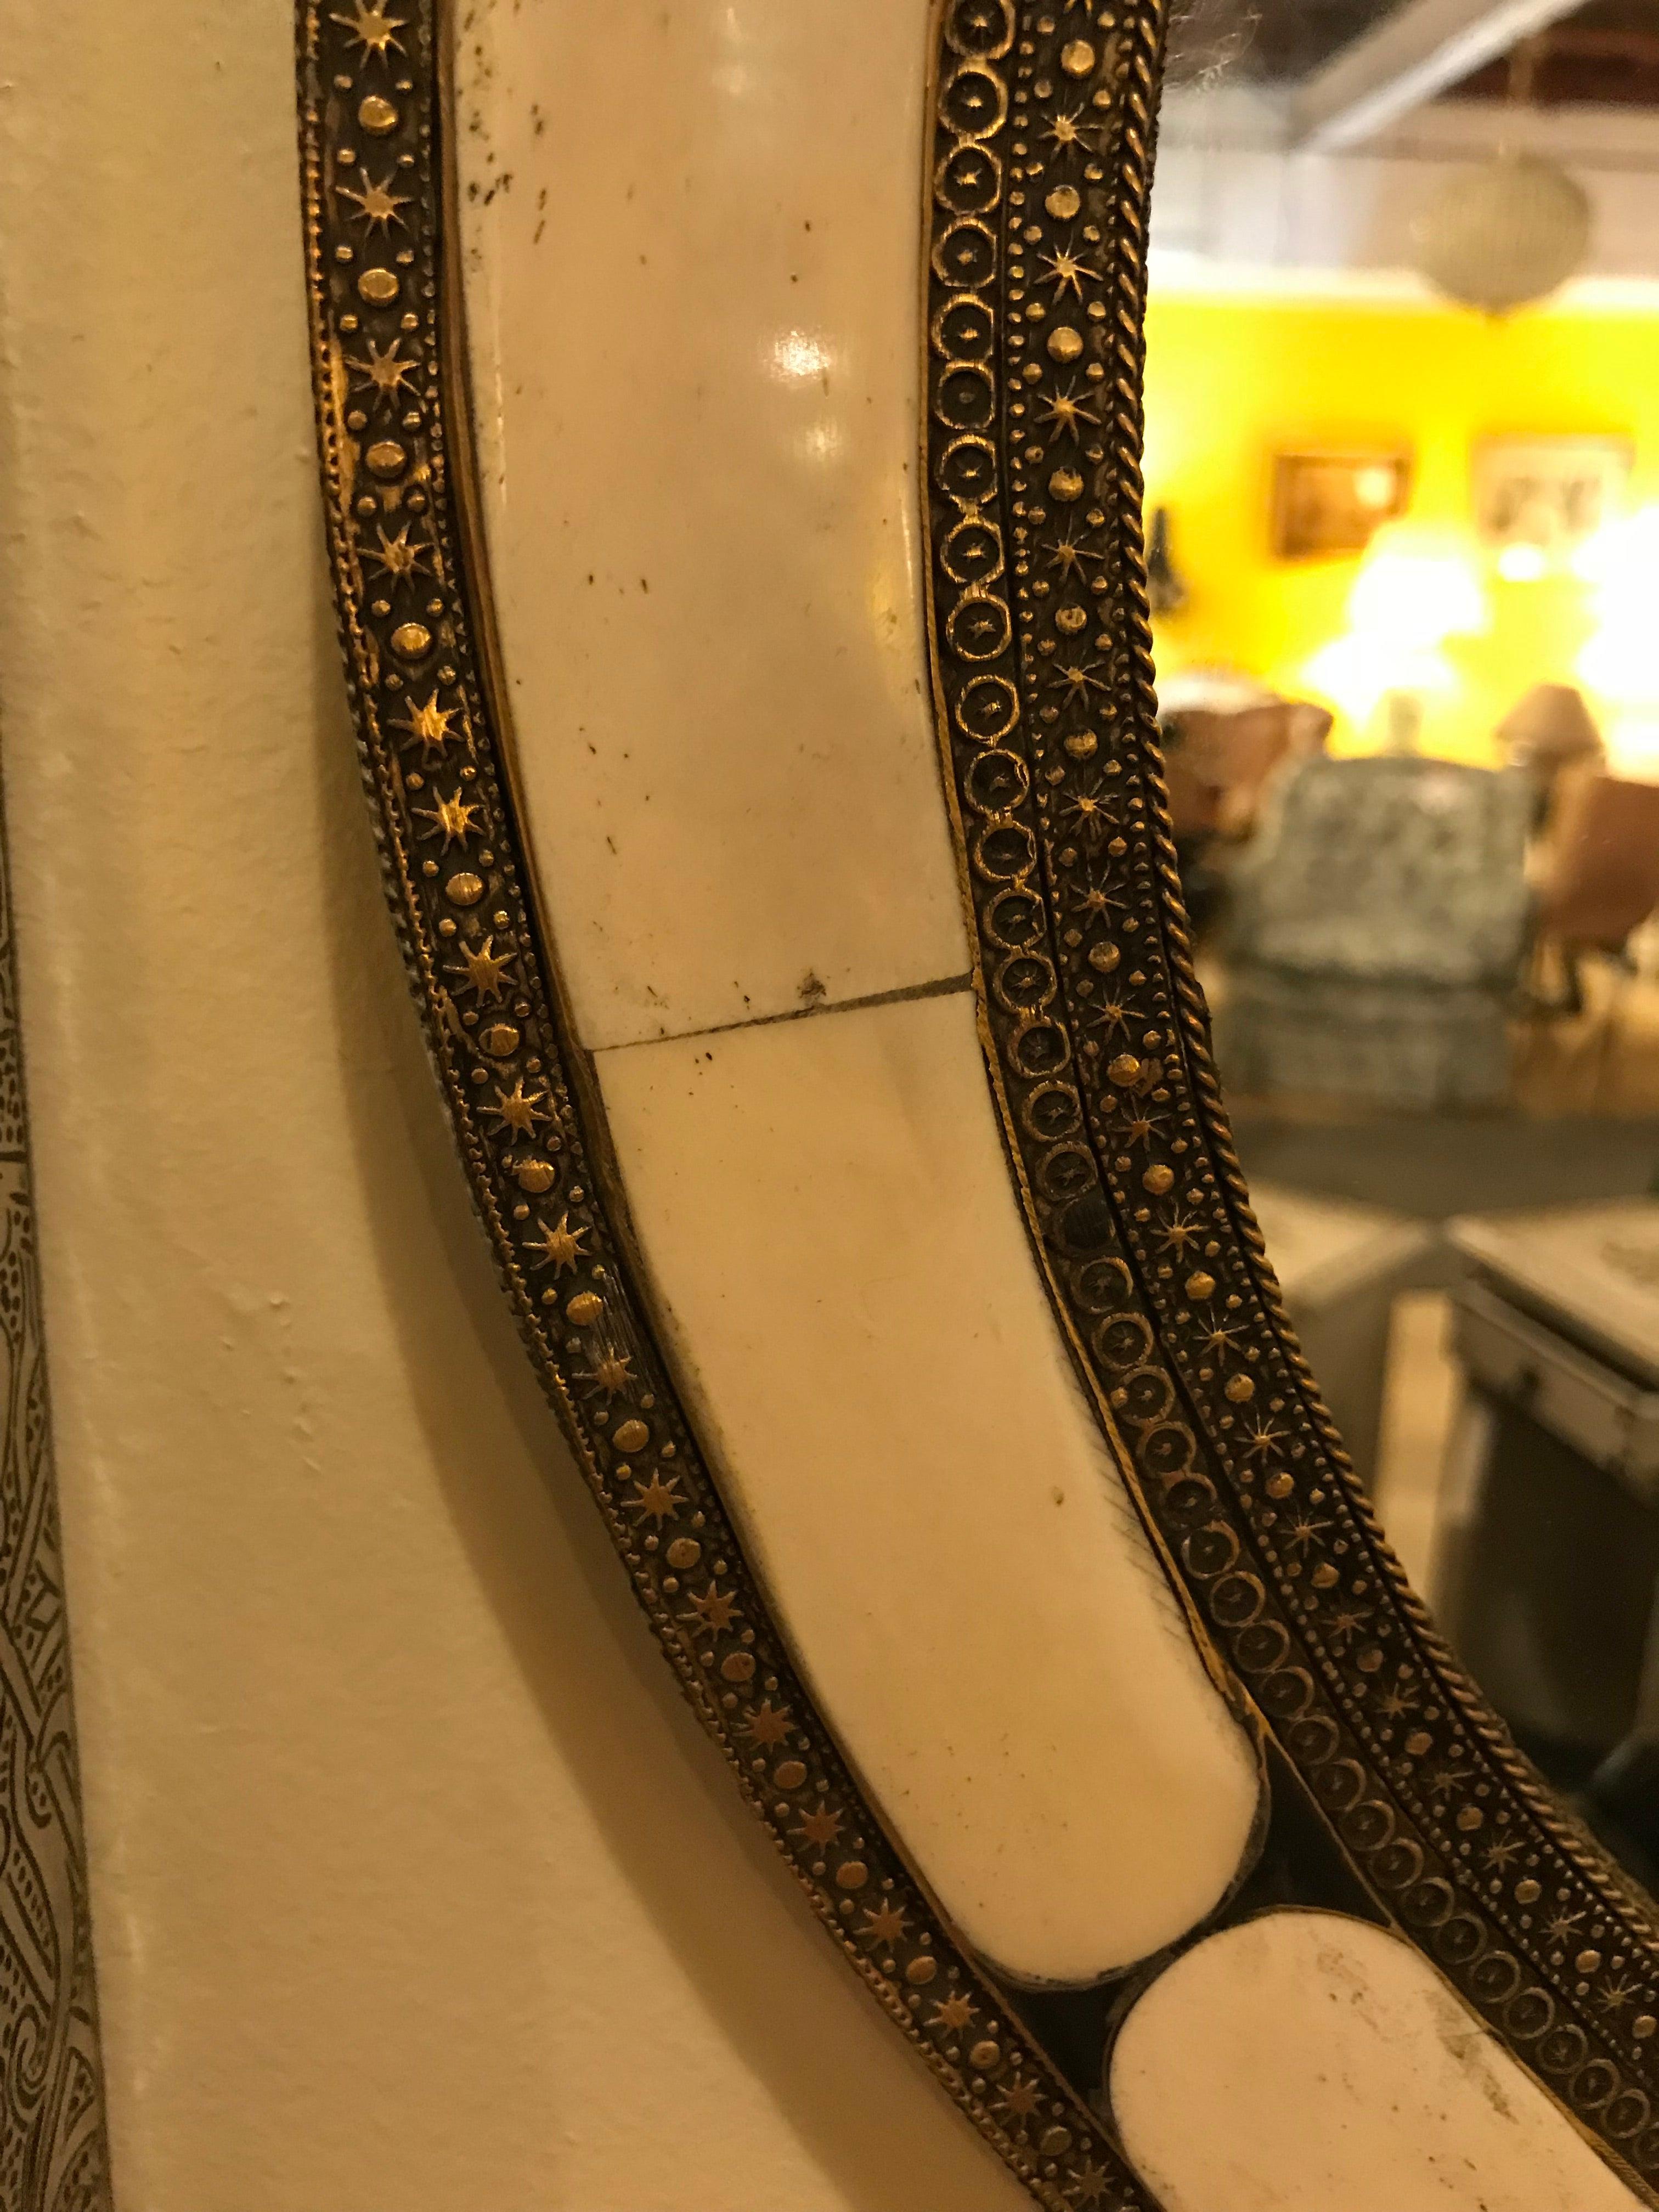 White Round Mirror in Hollywood Regency Style a Pair 
Handcrafted with bone and brass inlay and featuring beautiful design elements, this exquisite pair of mirrors brings a sense of robust elegance to any space.